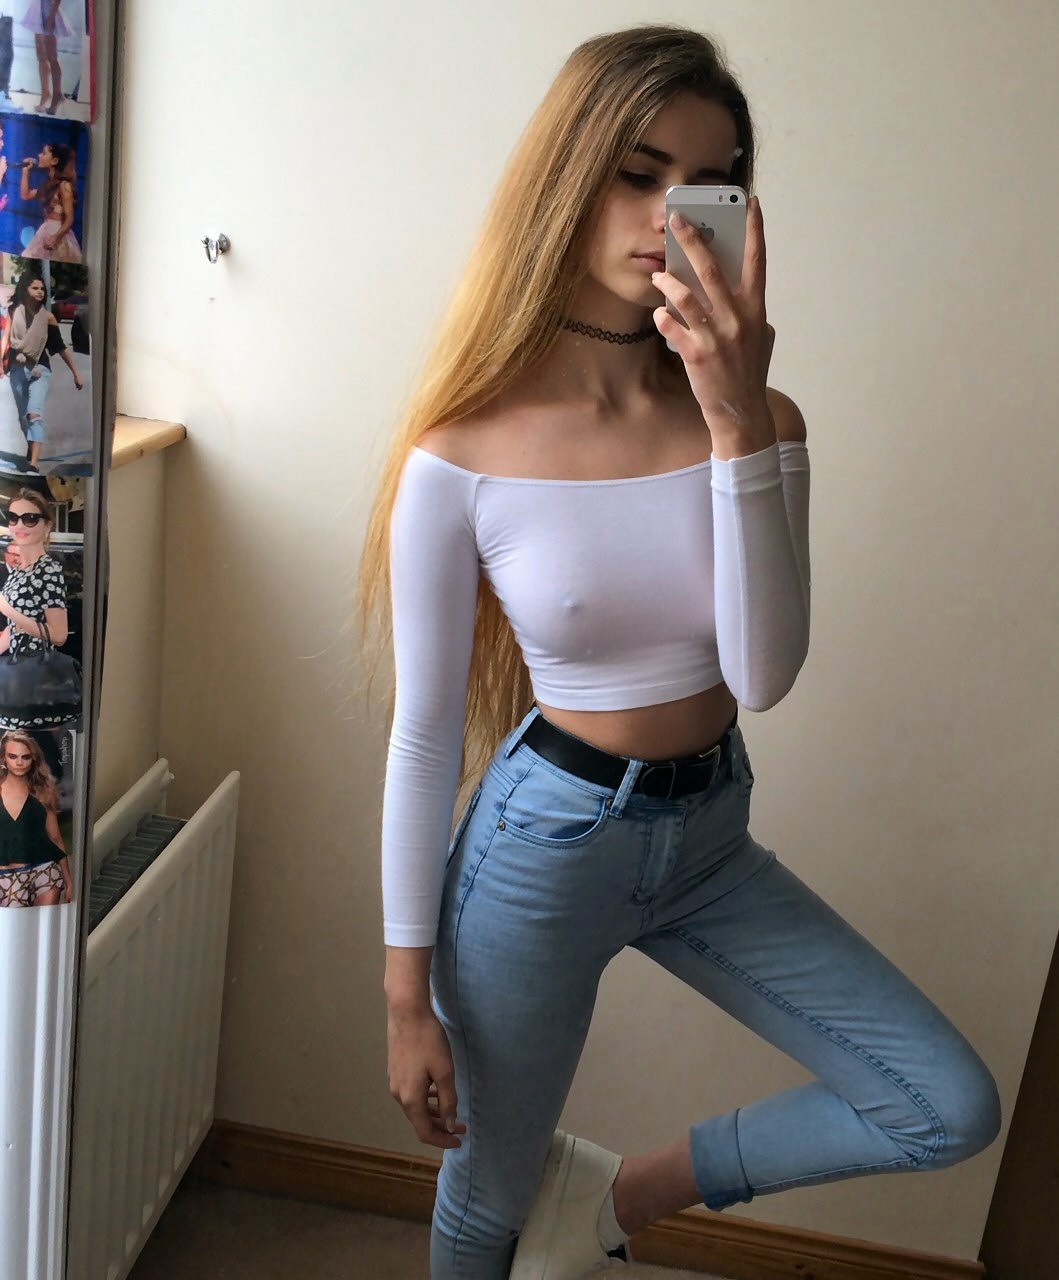 Tight top and jeans Porn Pic picture pic